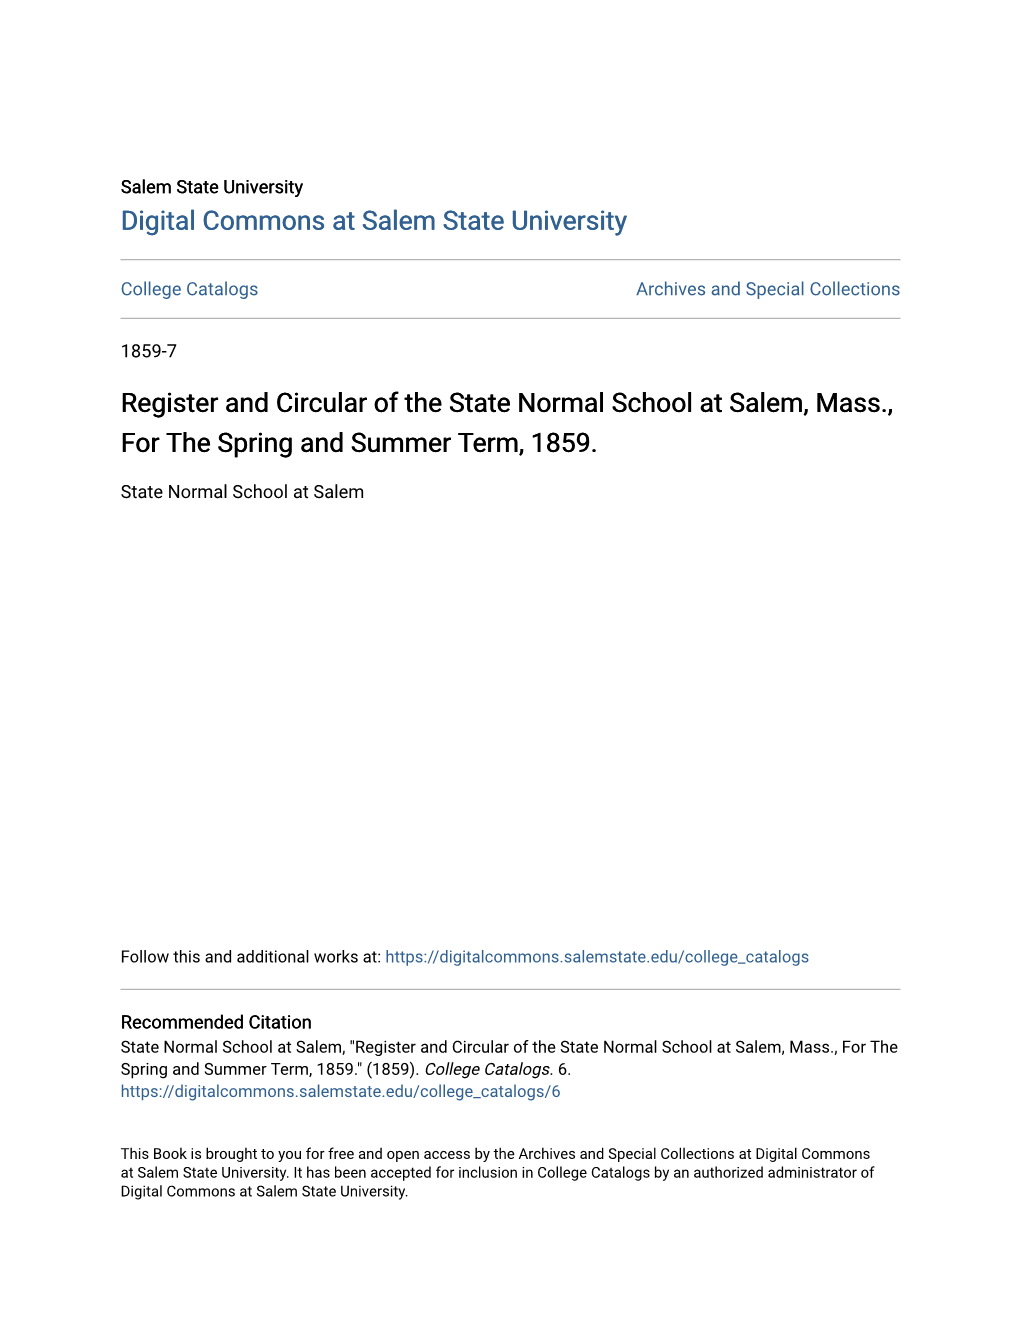 Register and Circular of the State Normal School at Salem, Mass., for the Spring and Summer Term, 1859